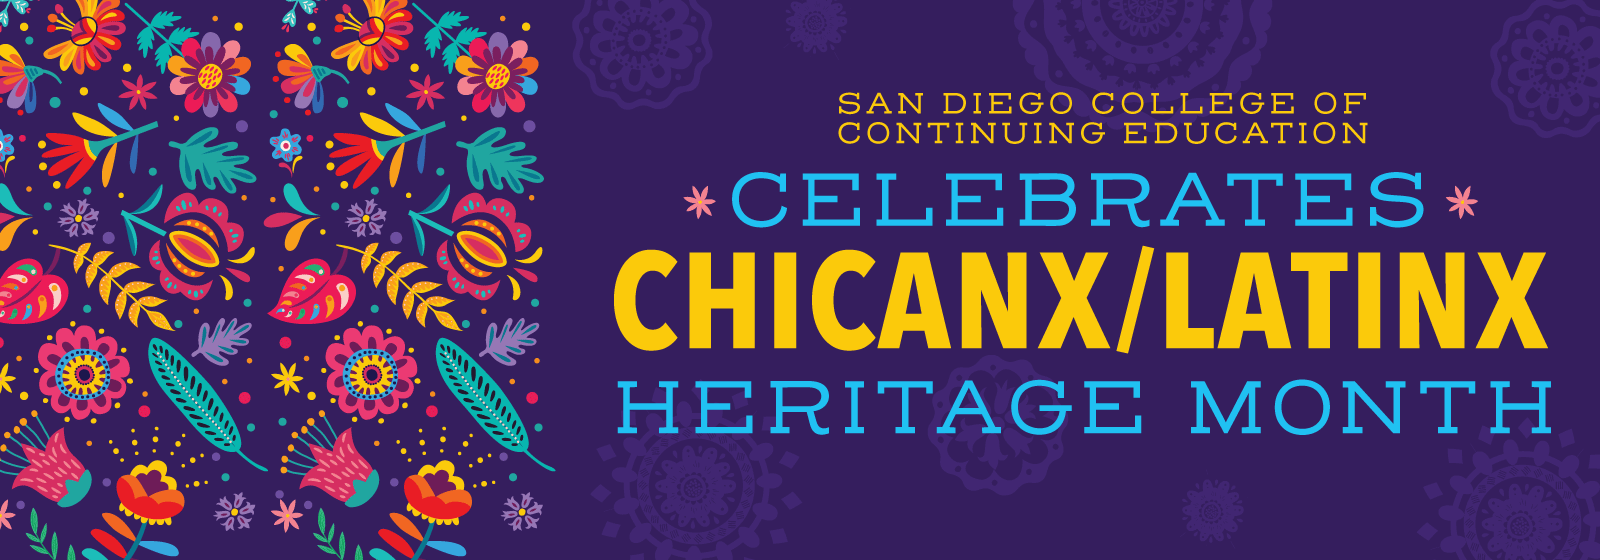 San Diego College of Continuing Education celebrates Chicanx/Latinx Heritage Month